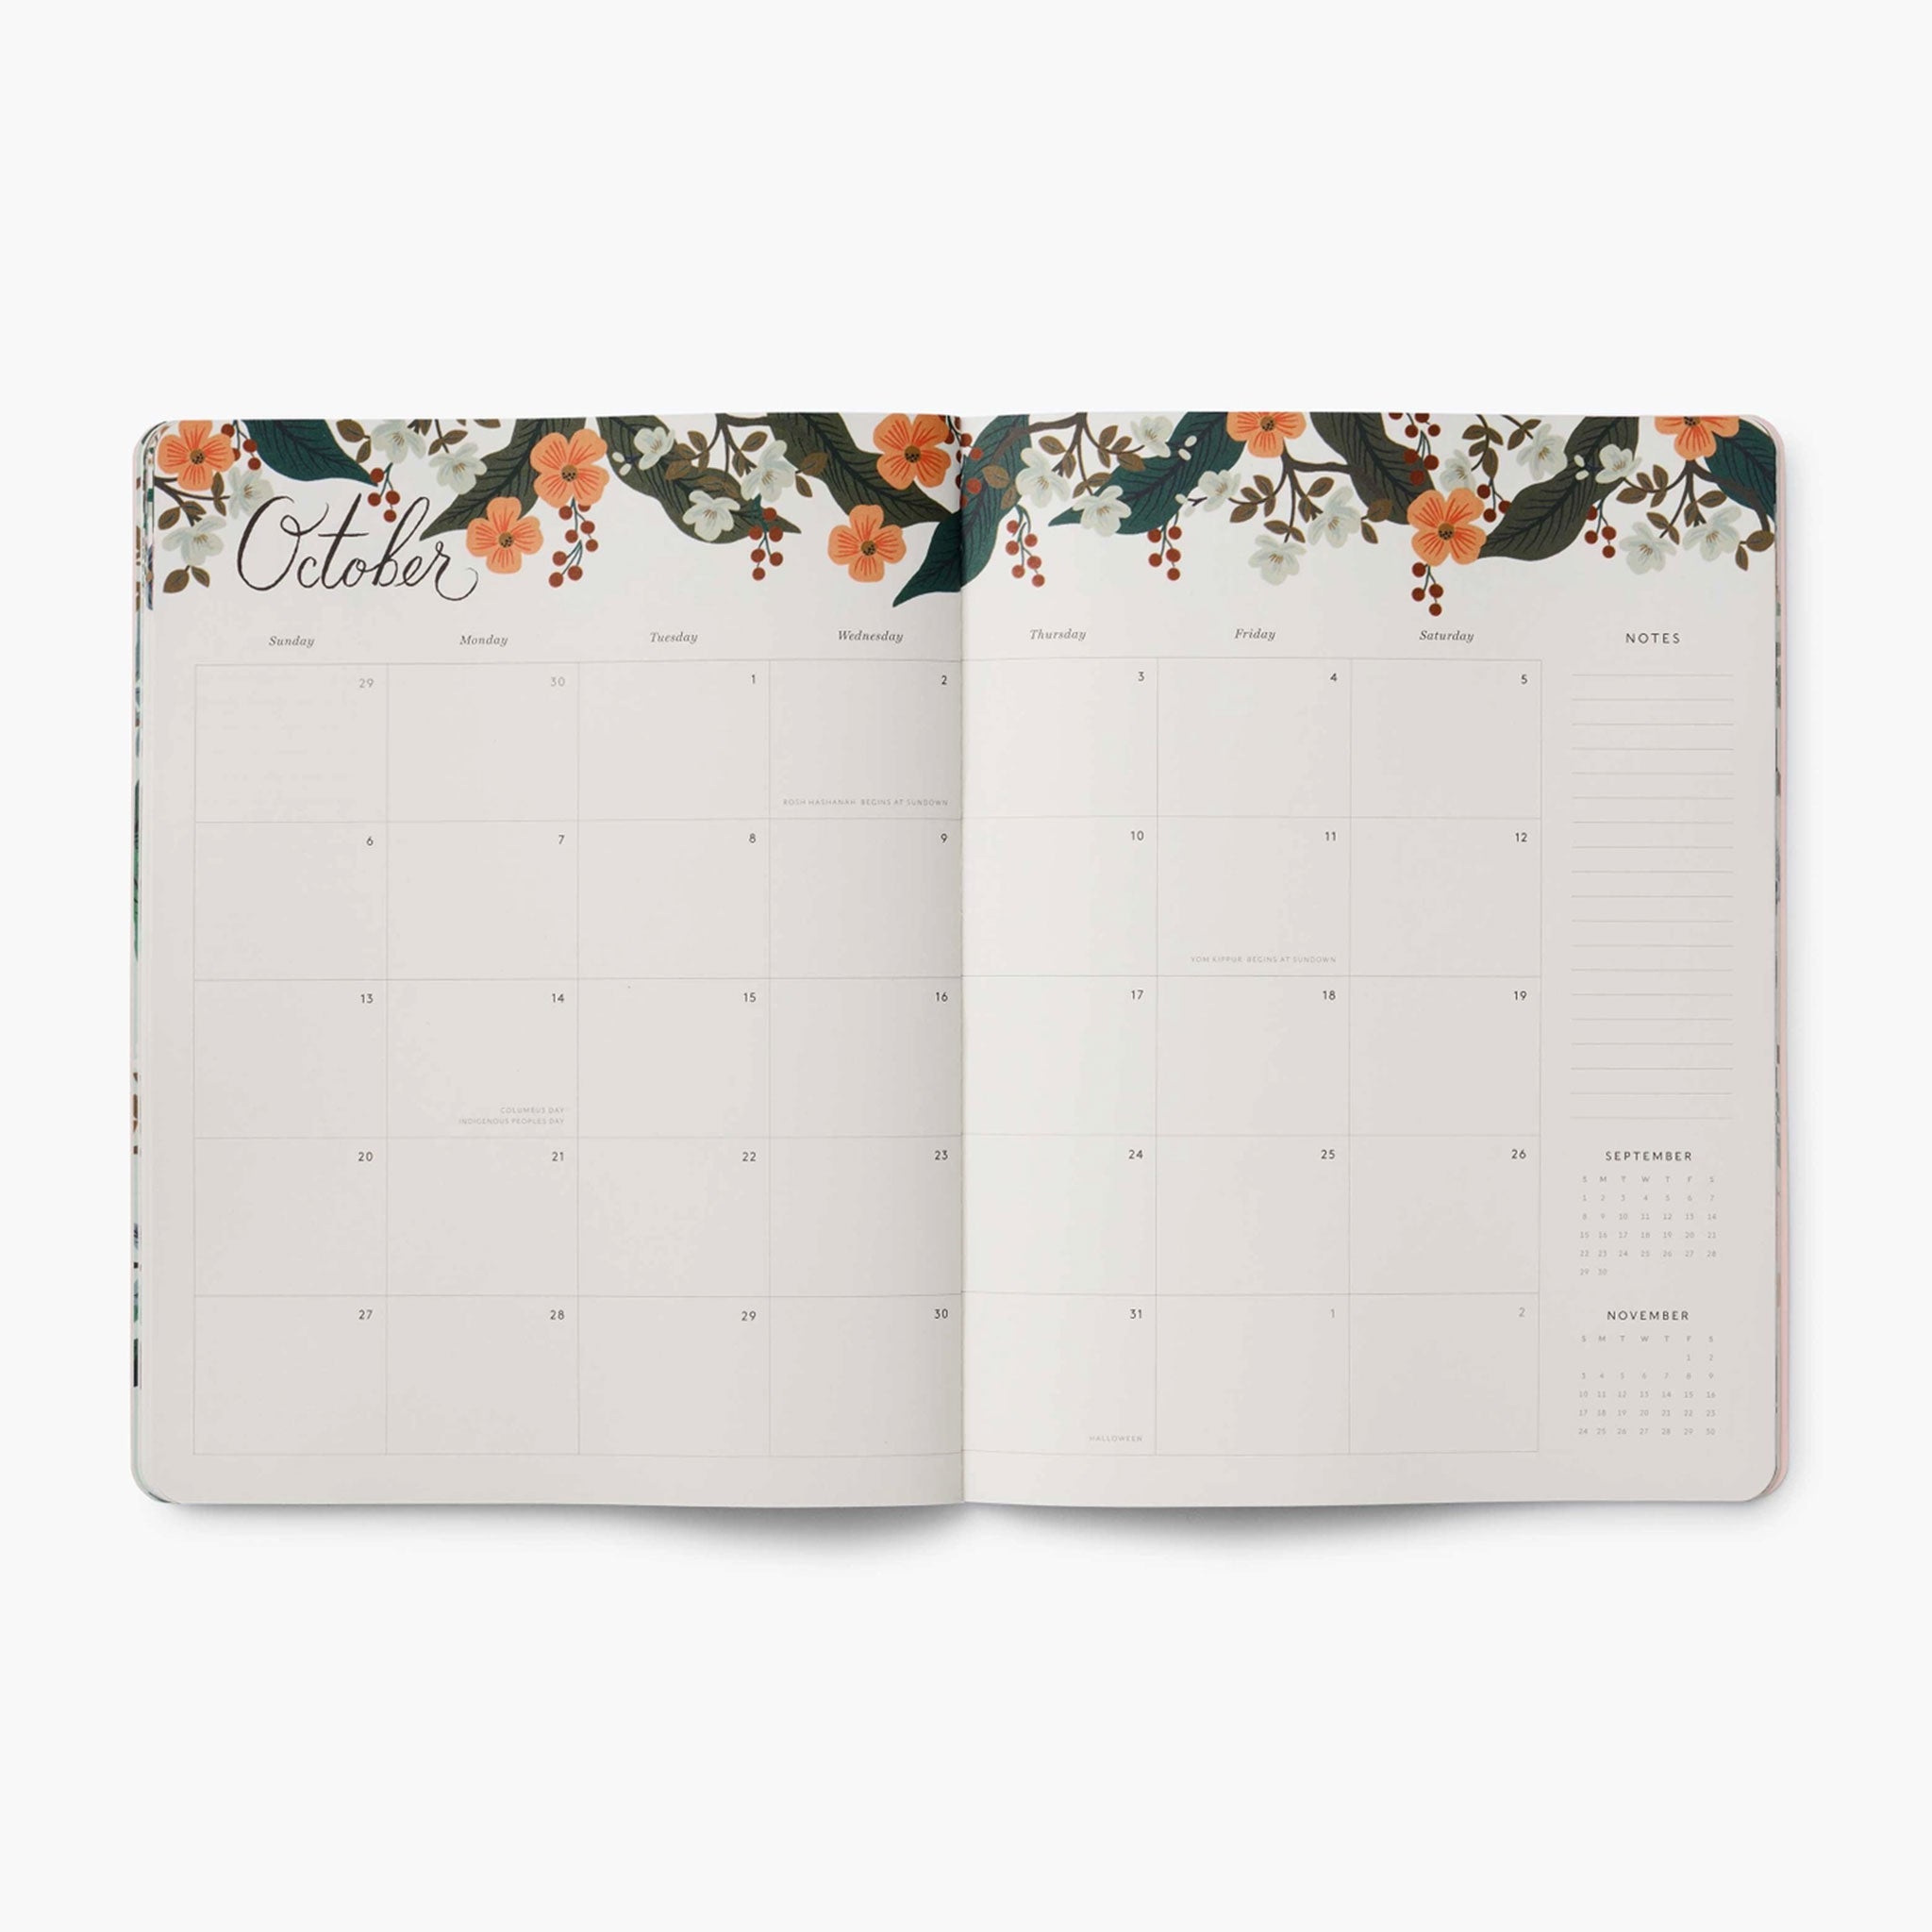 The planner opened to a page showing a monthly view with a floral border at the top. 